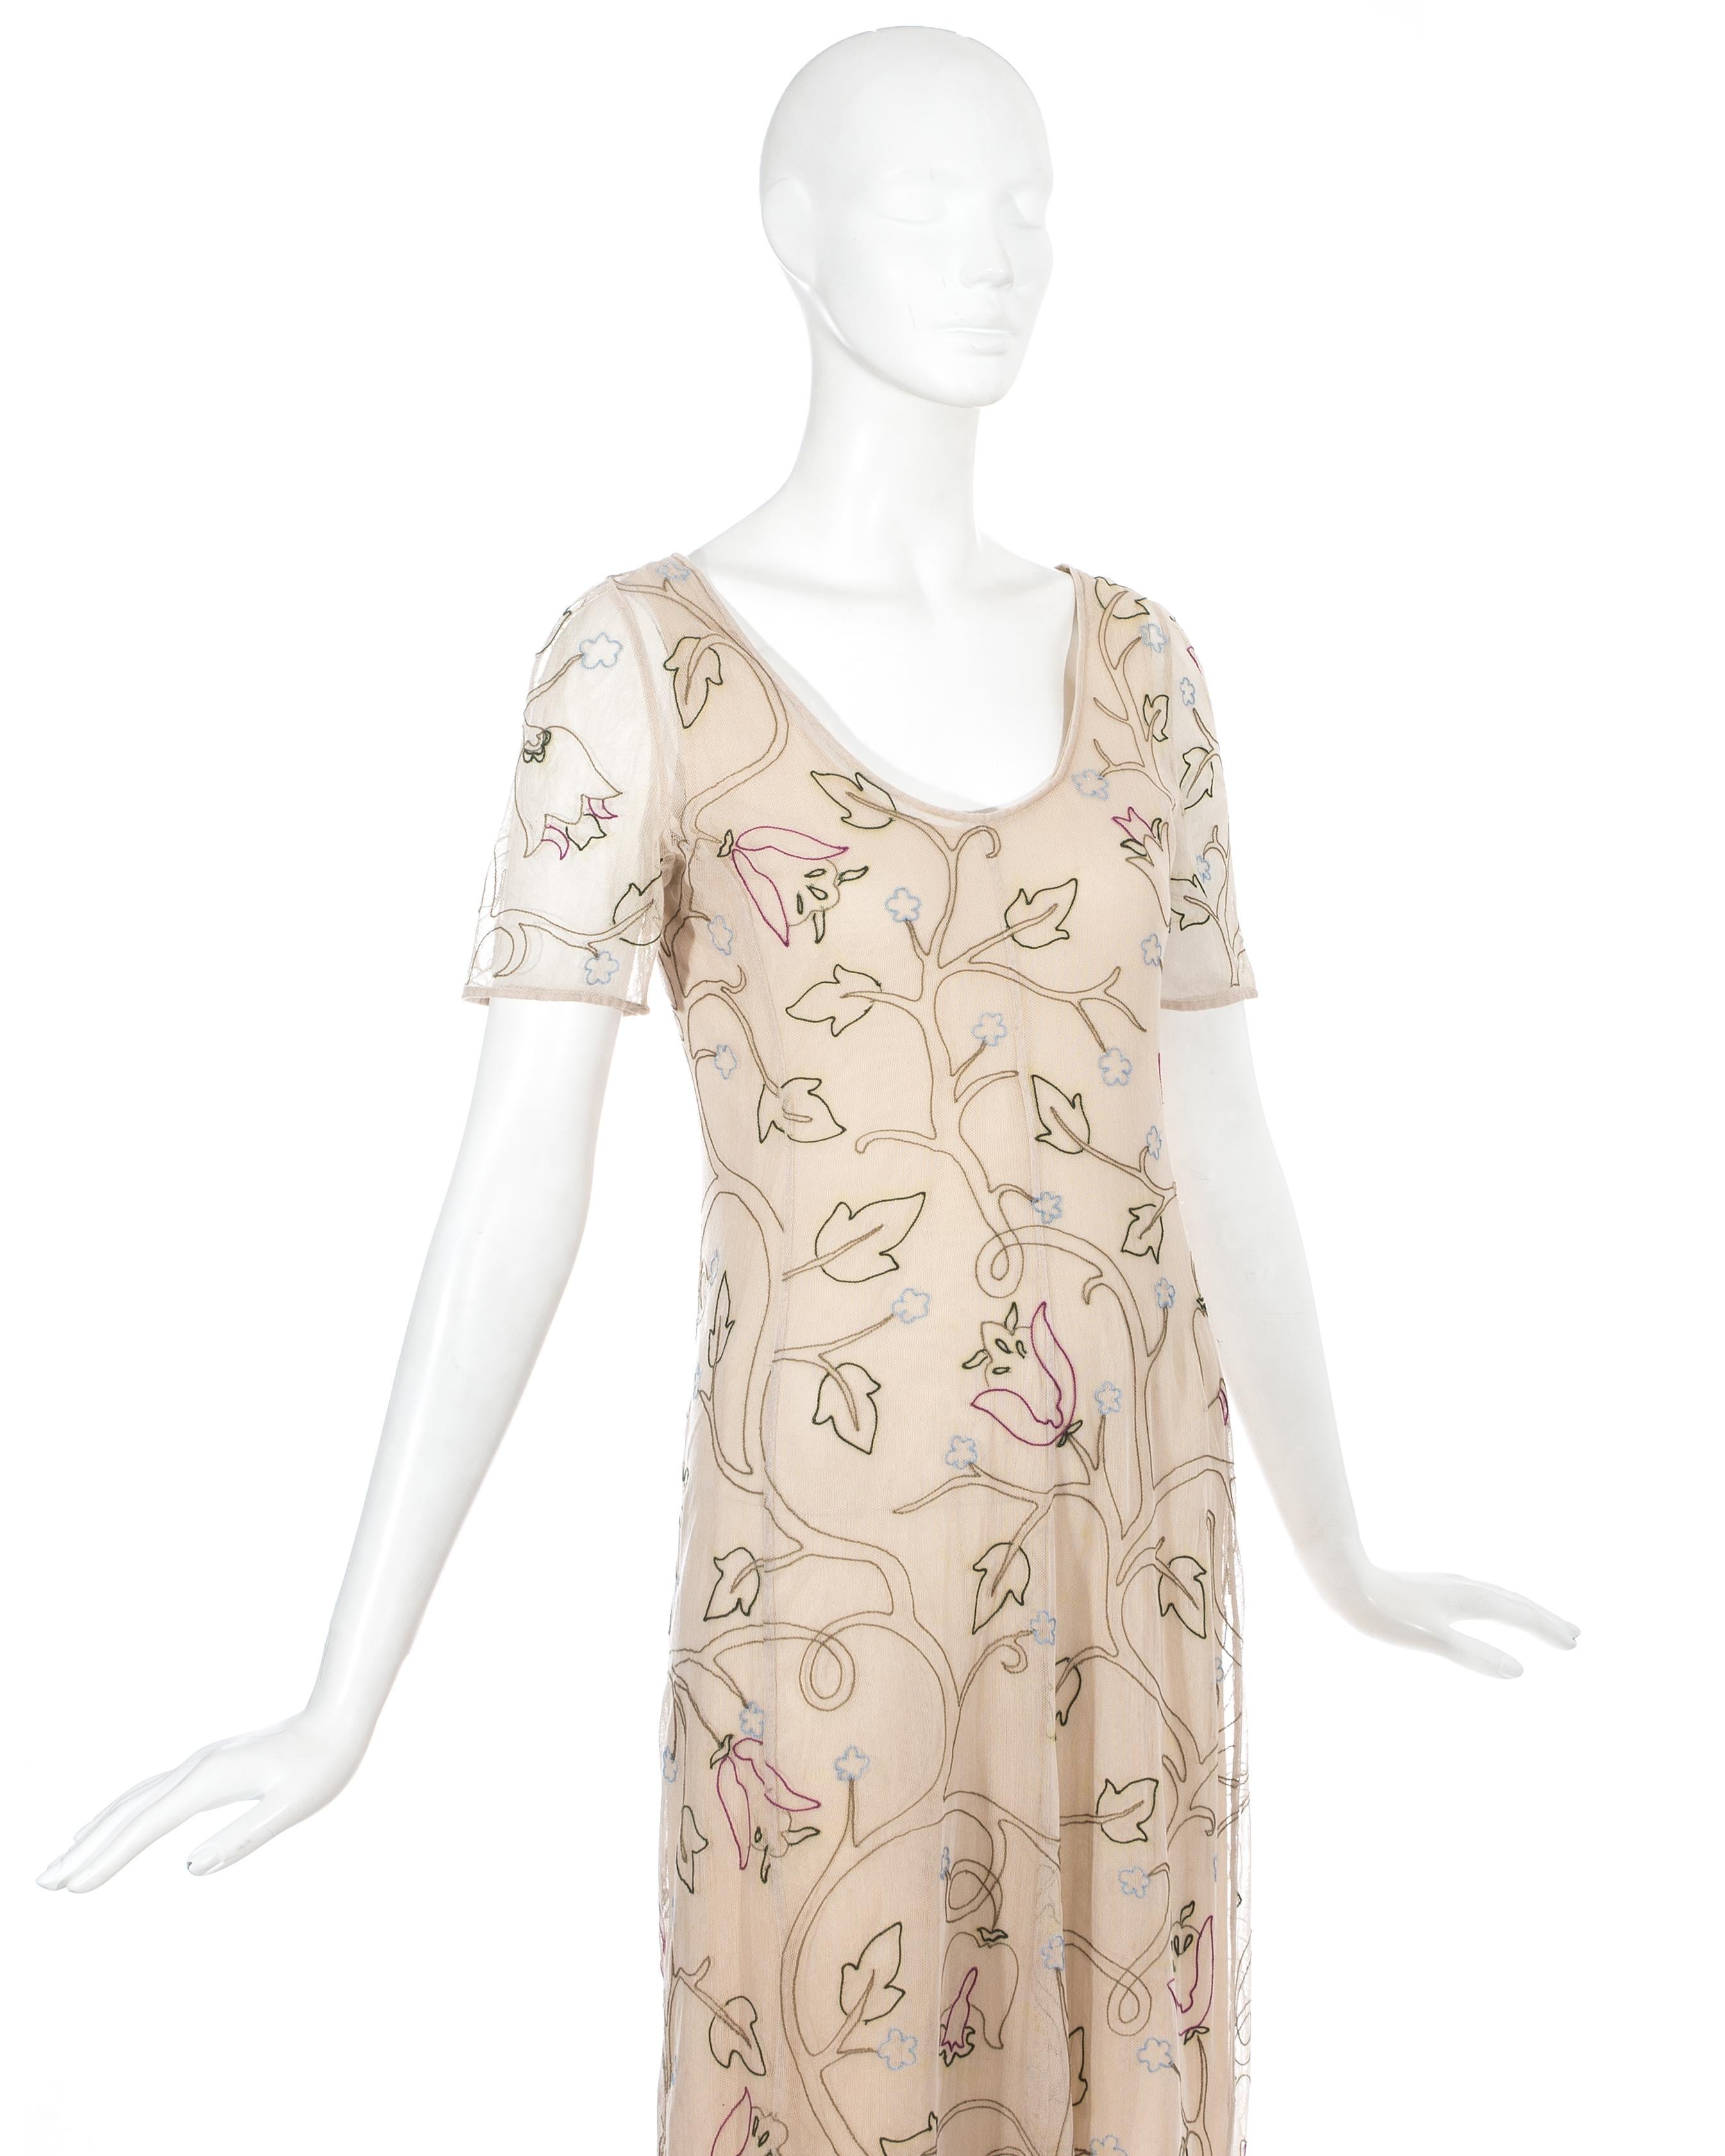 Prada nude mesh evening dress with floral embroidery, ss 1997 For Sale 1